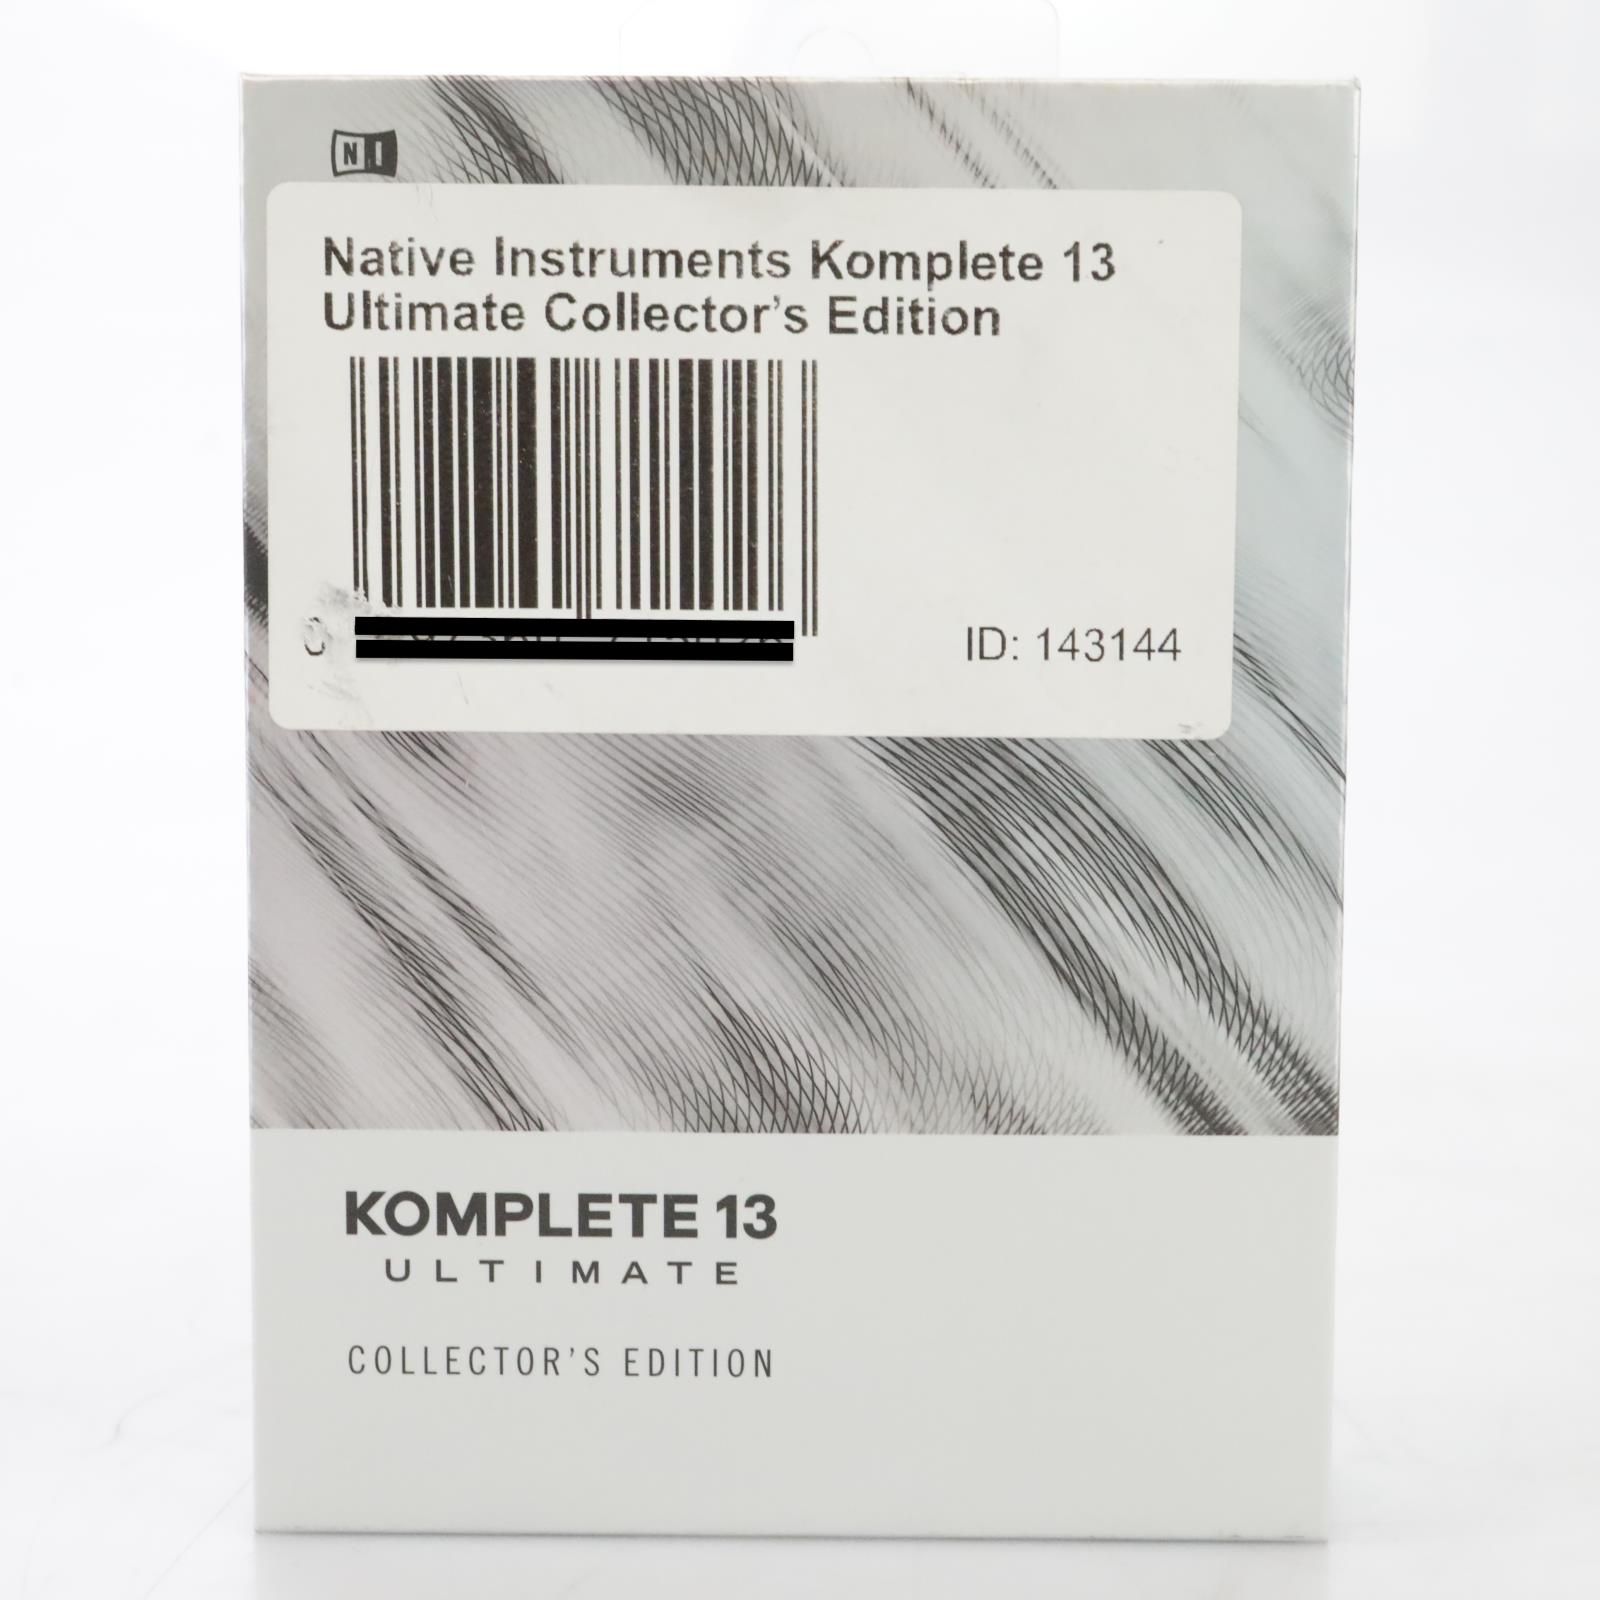 Native Instruments Komplete 13 Ultimate Collector's Edition Sealed Box #44551